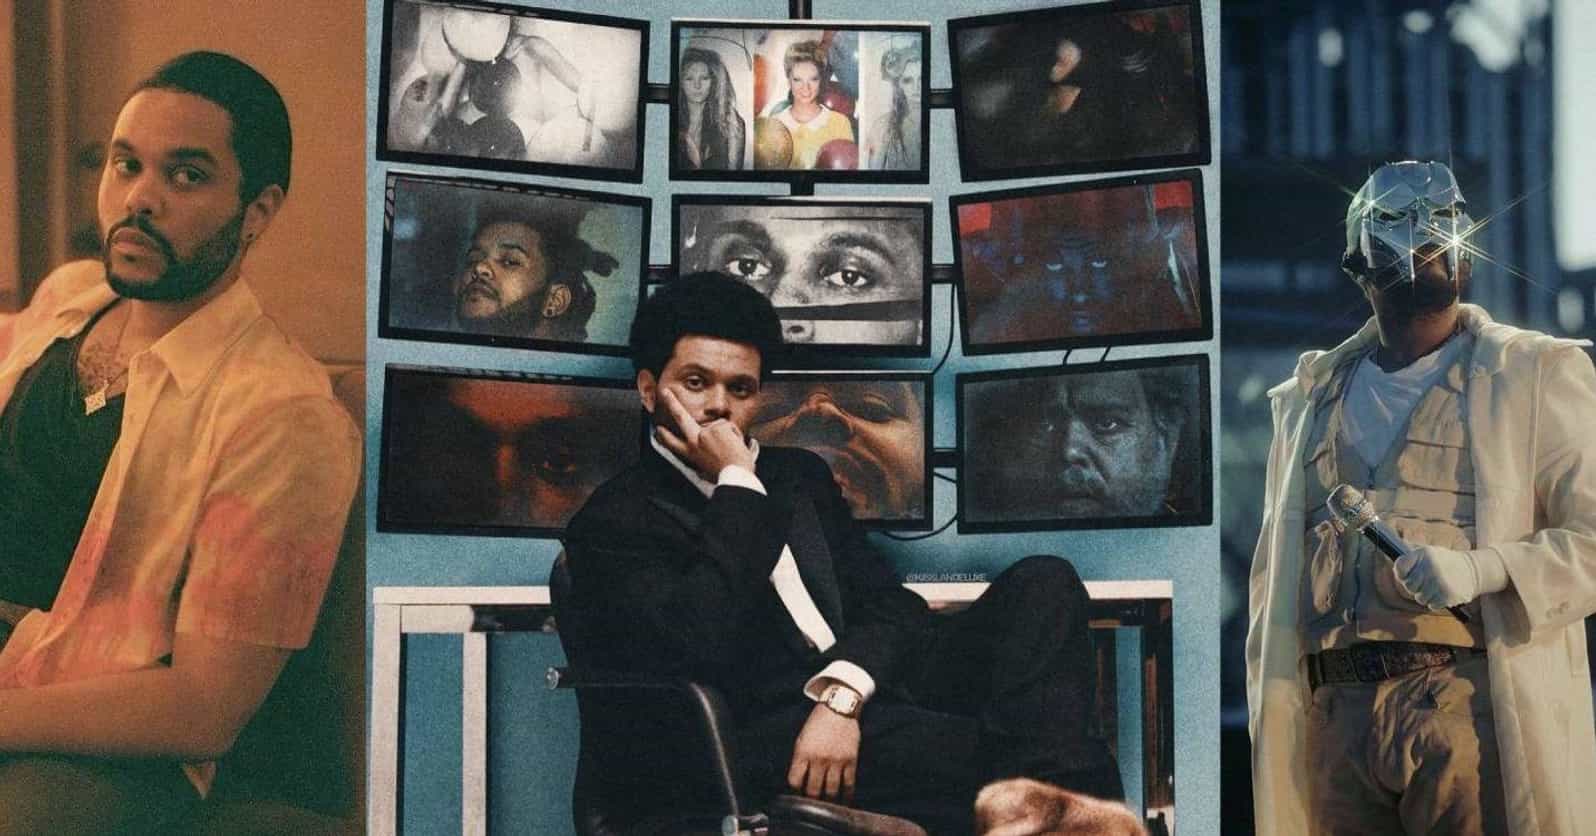 The Best The Weeknd Songs, Ranked by Fans